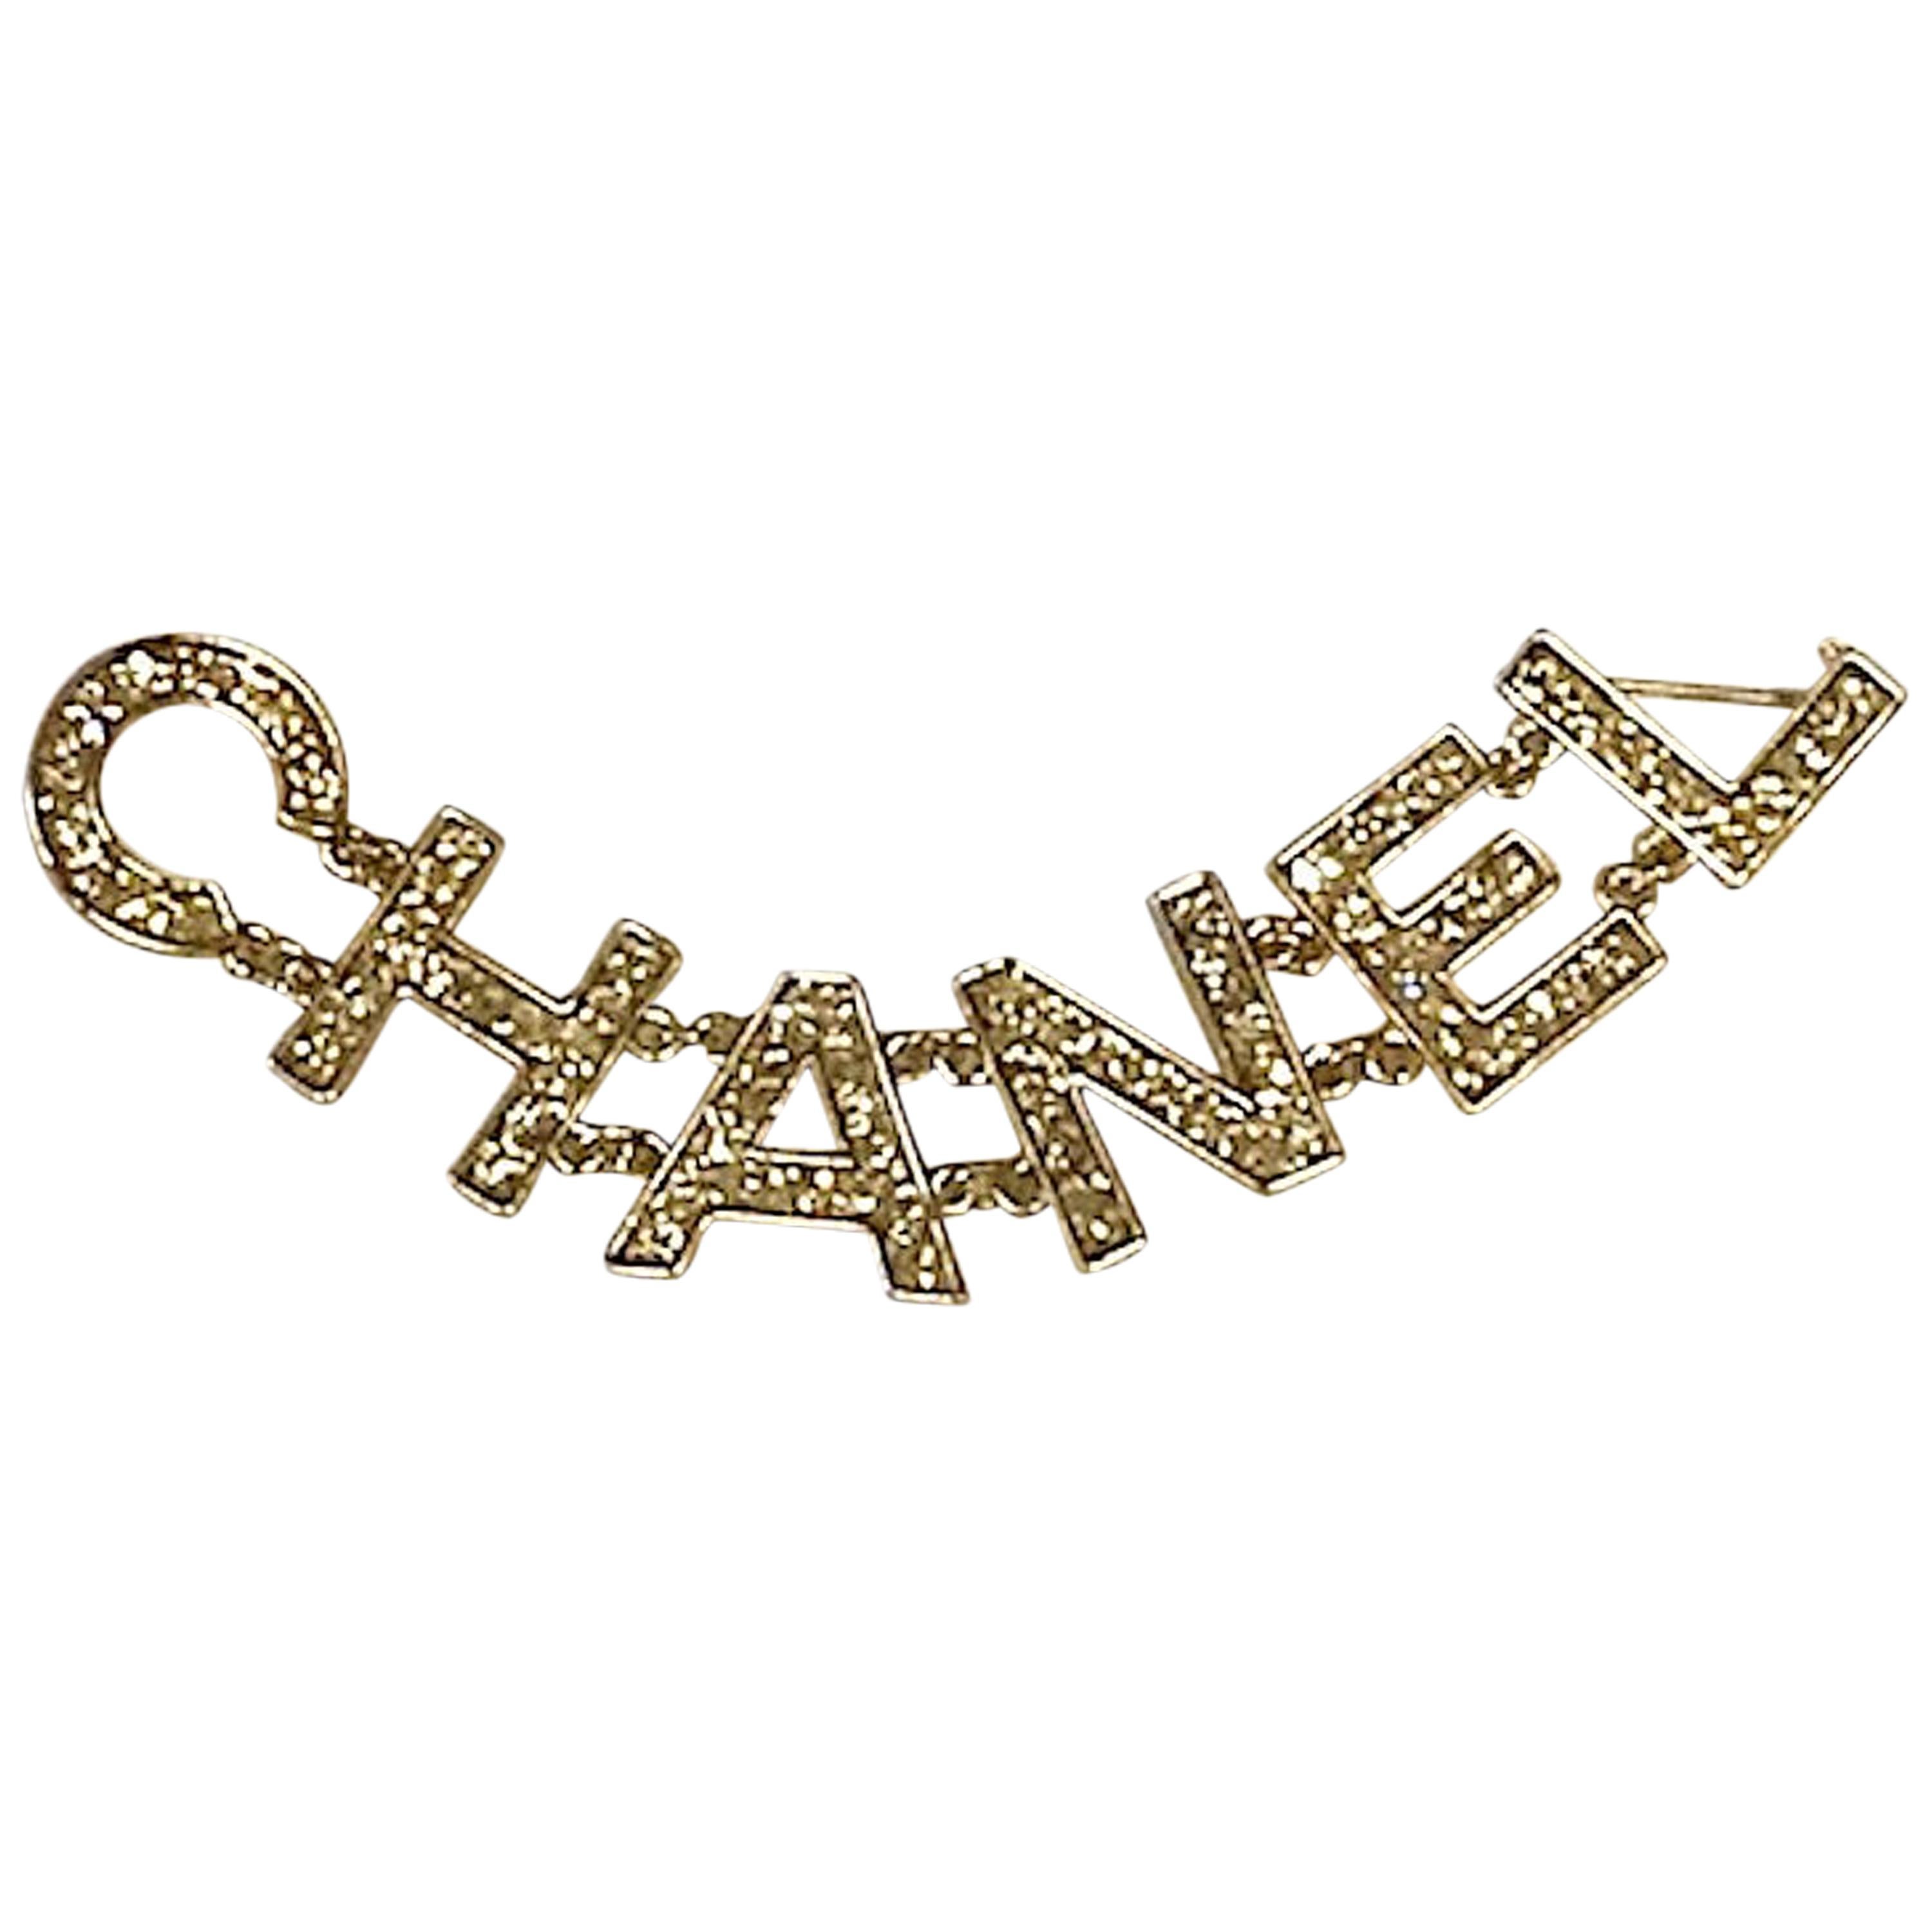 Chanel "C H A N E L"  Name in Crystal Letters double Pin, 2018